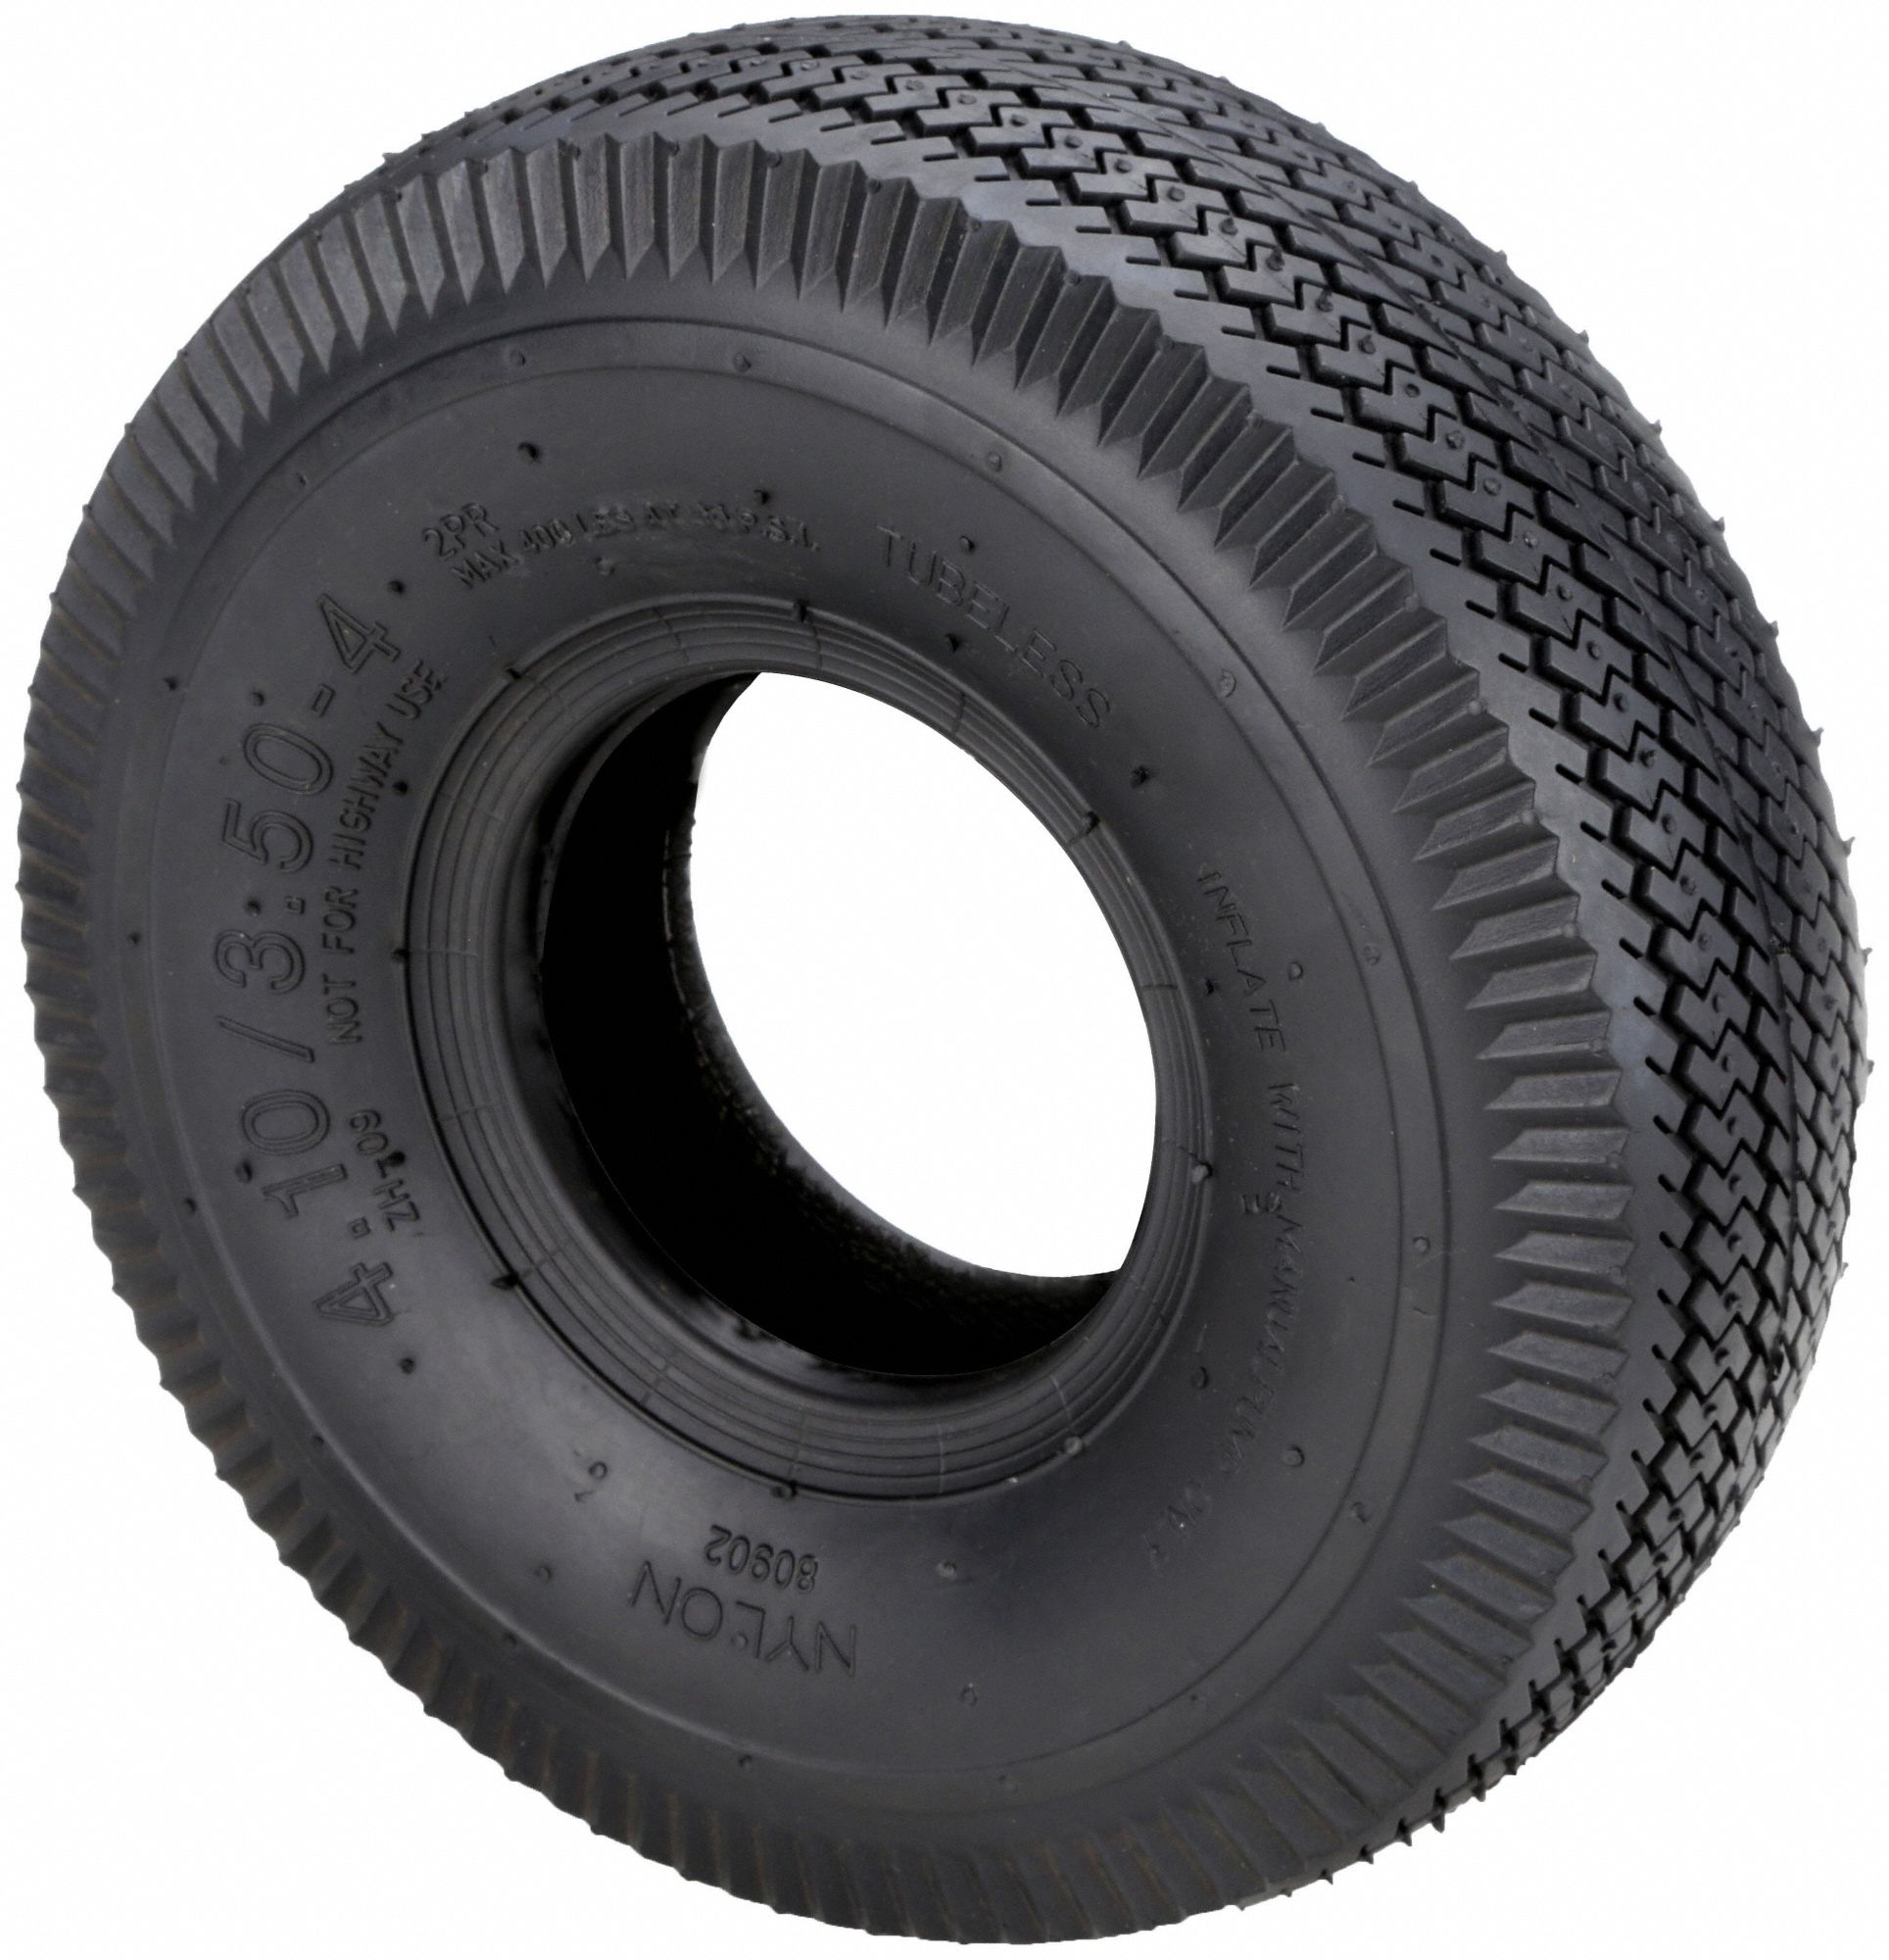 APPROVED VENDOR Replacement Tire: 4.10/3.50-4, 10 in Tire Dia., 3 1/2 in  Tire Wd, Sawtooth, Rubber